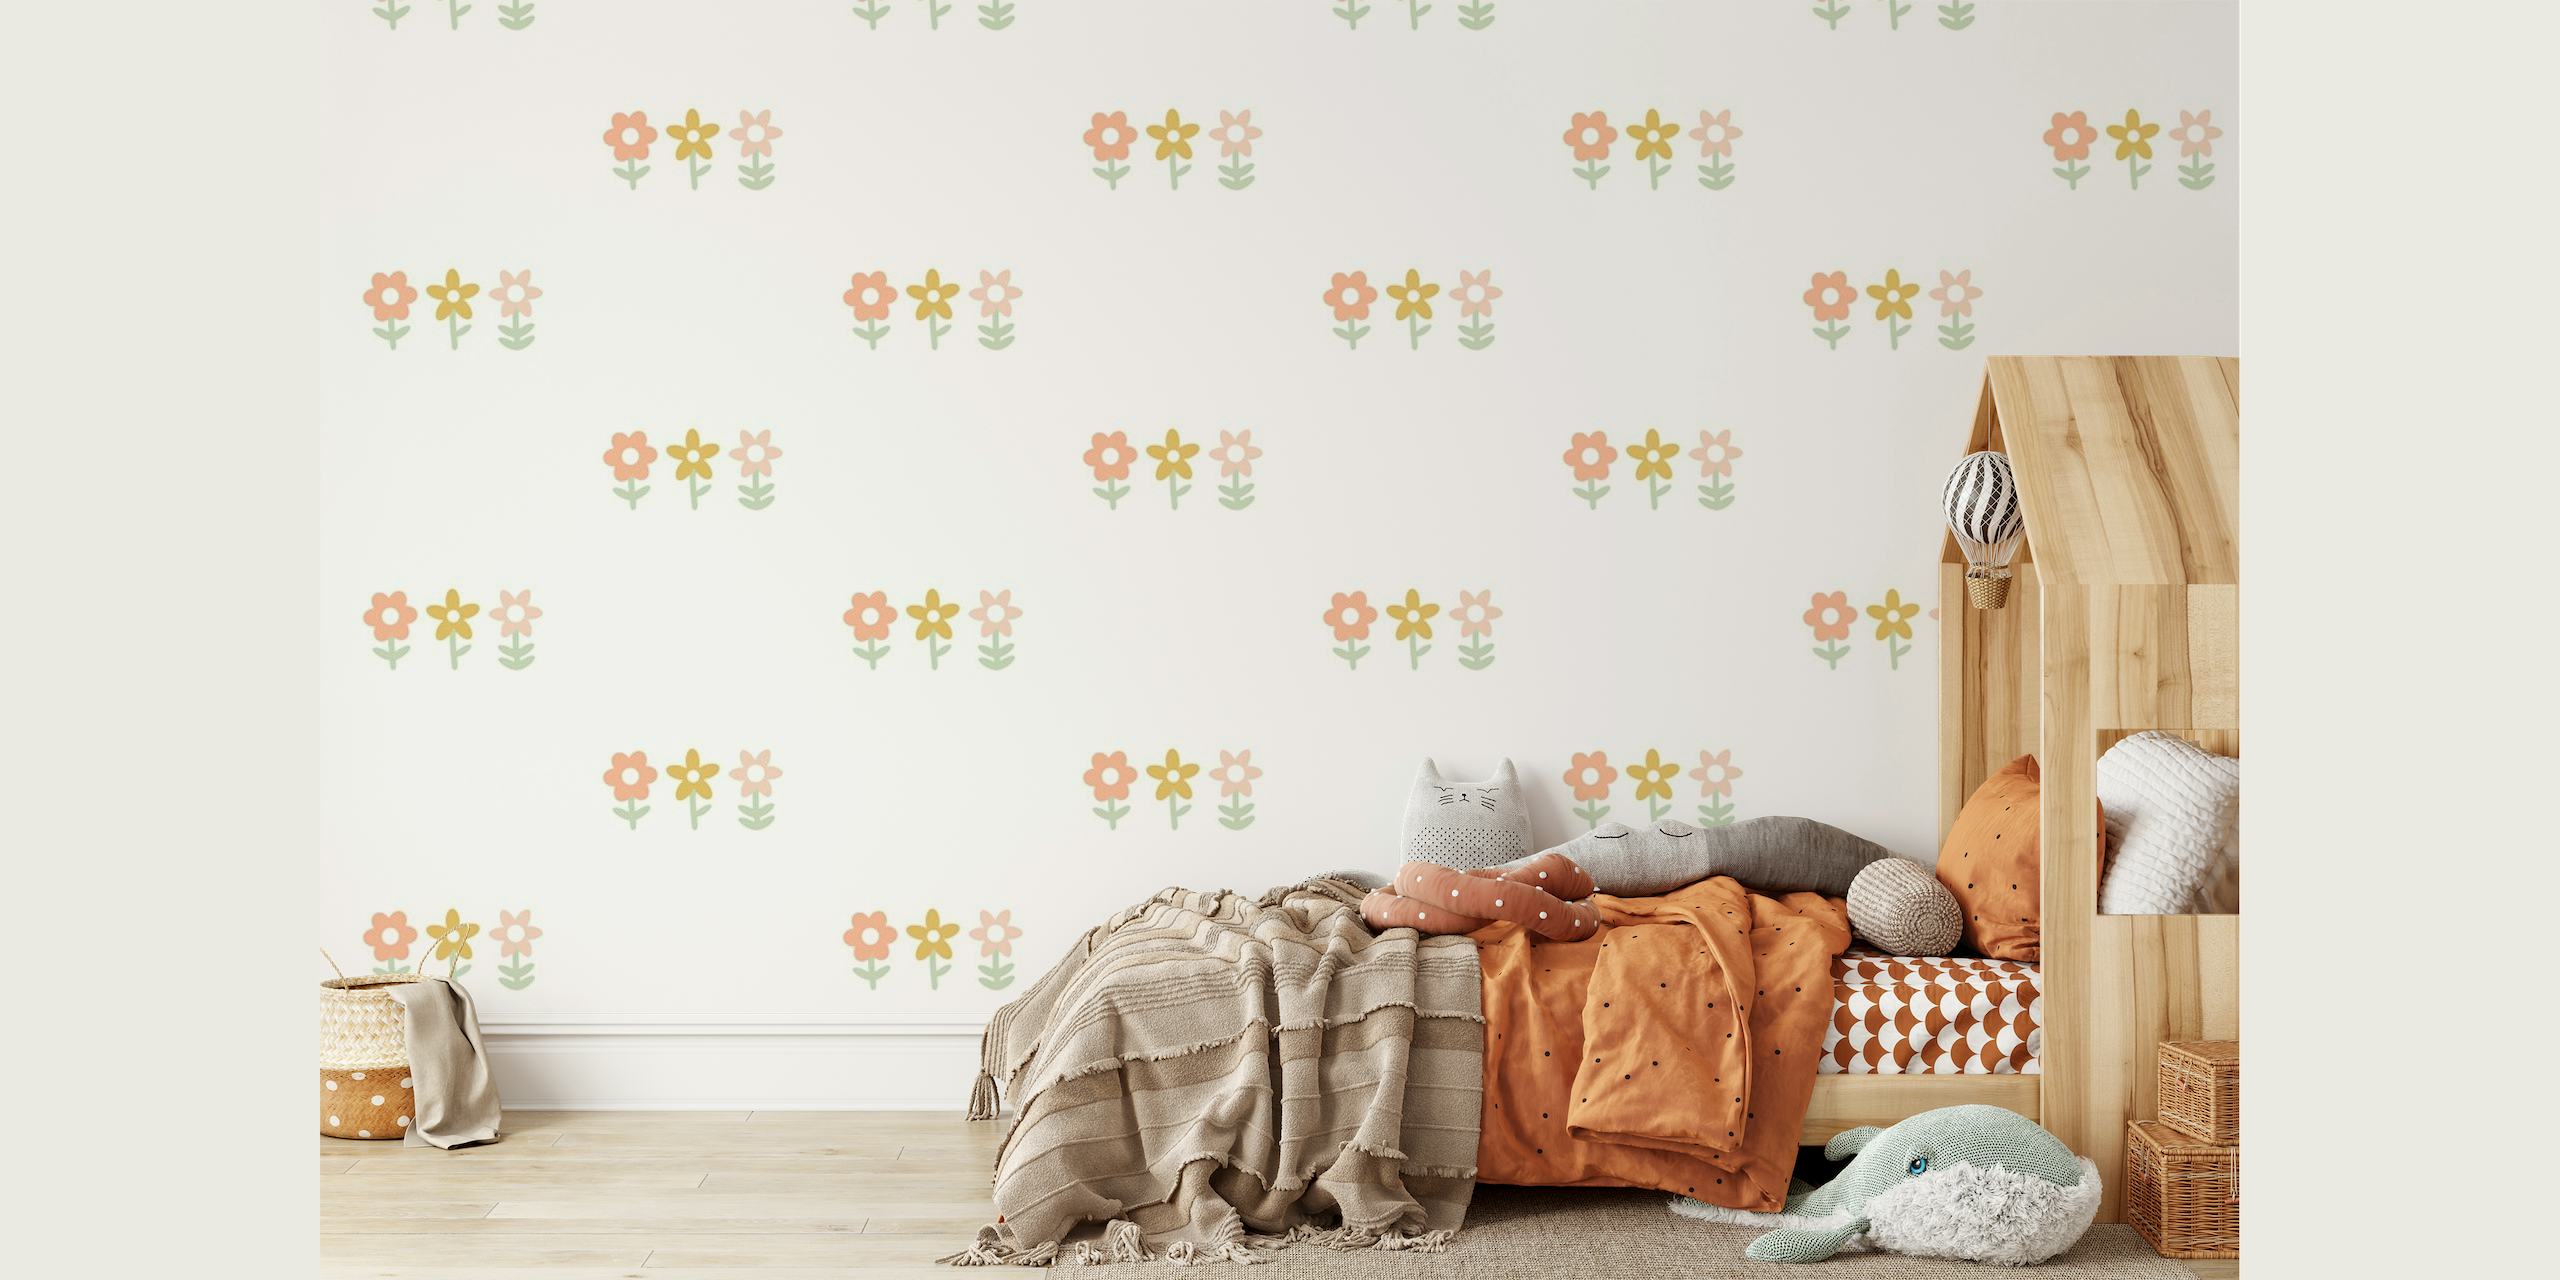 Boho style floral pattern wall mural in neutral tones